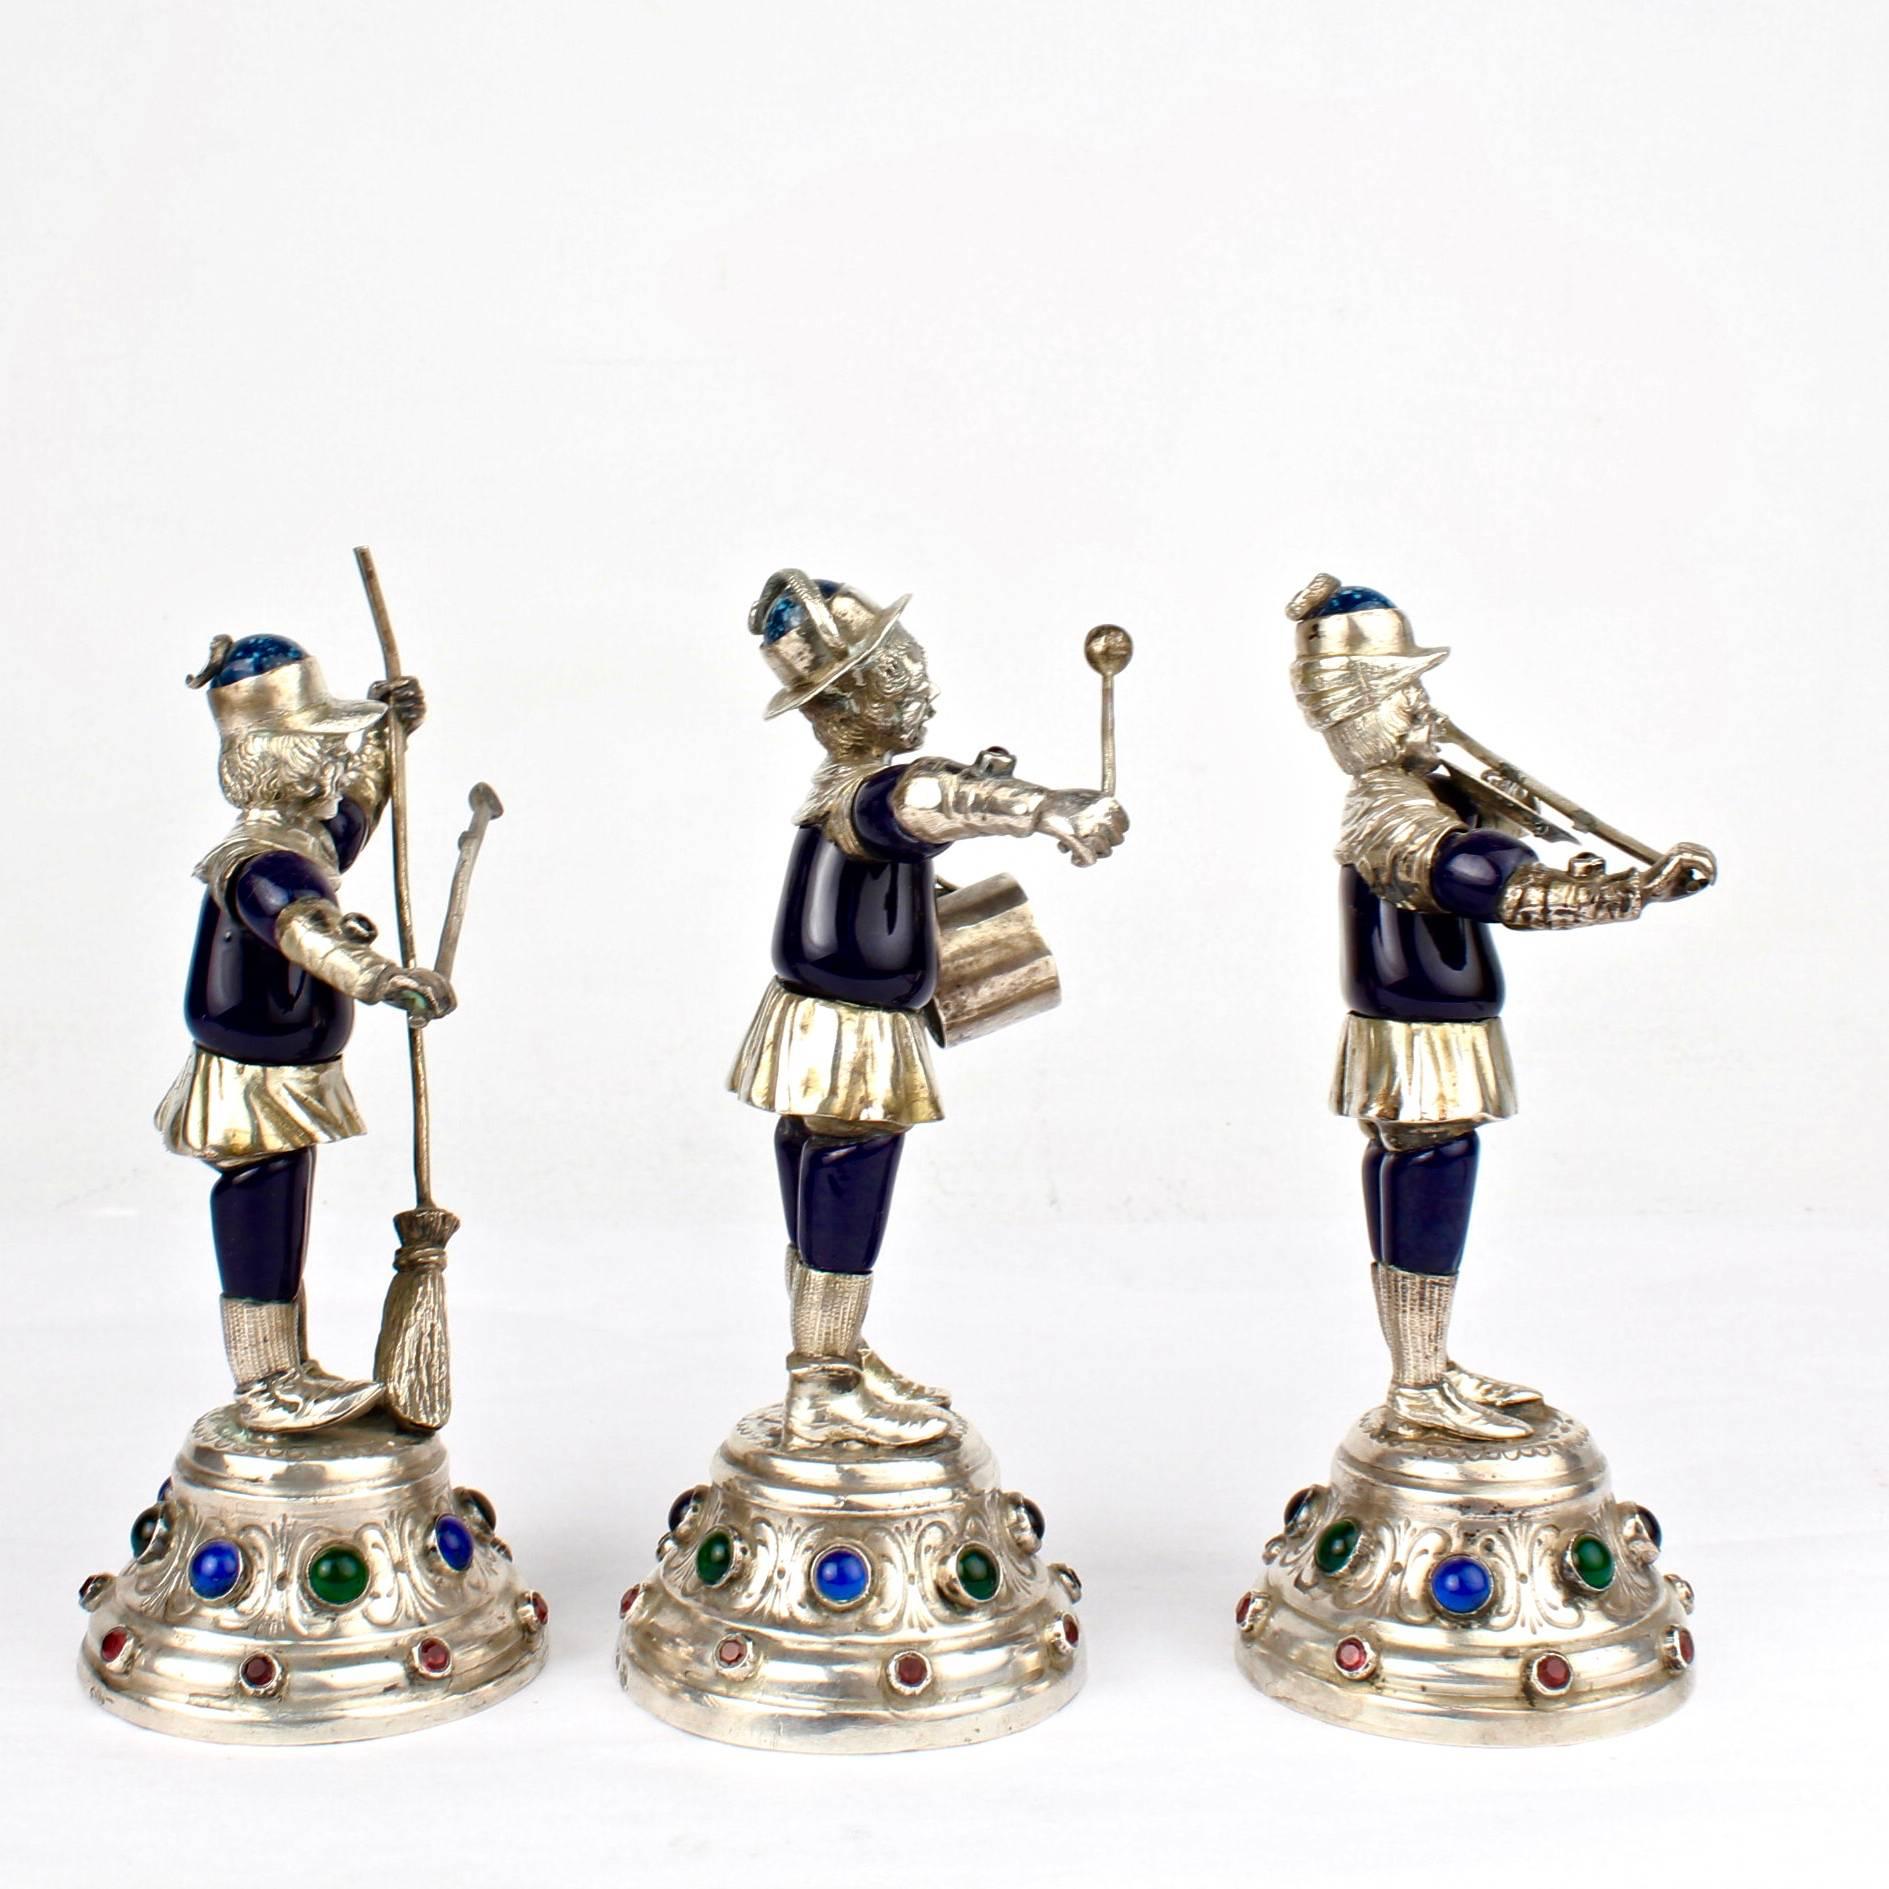 Three 19th Century Jeweled & Enameled German Coin Silver Musician Figurines For Sale 1